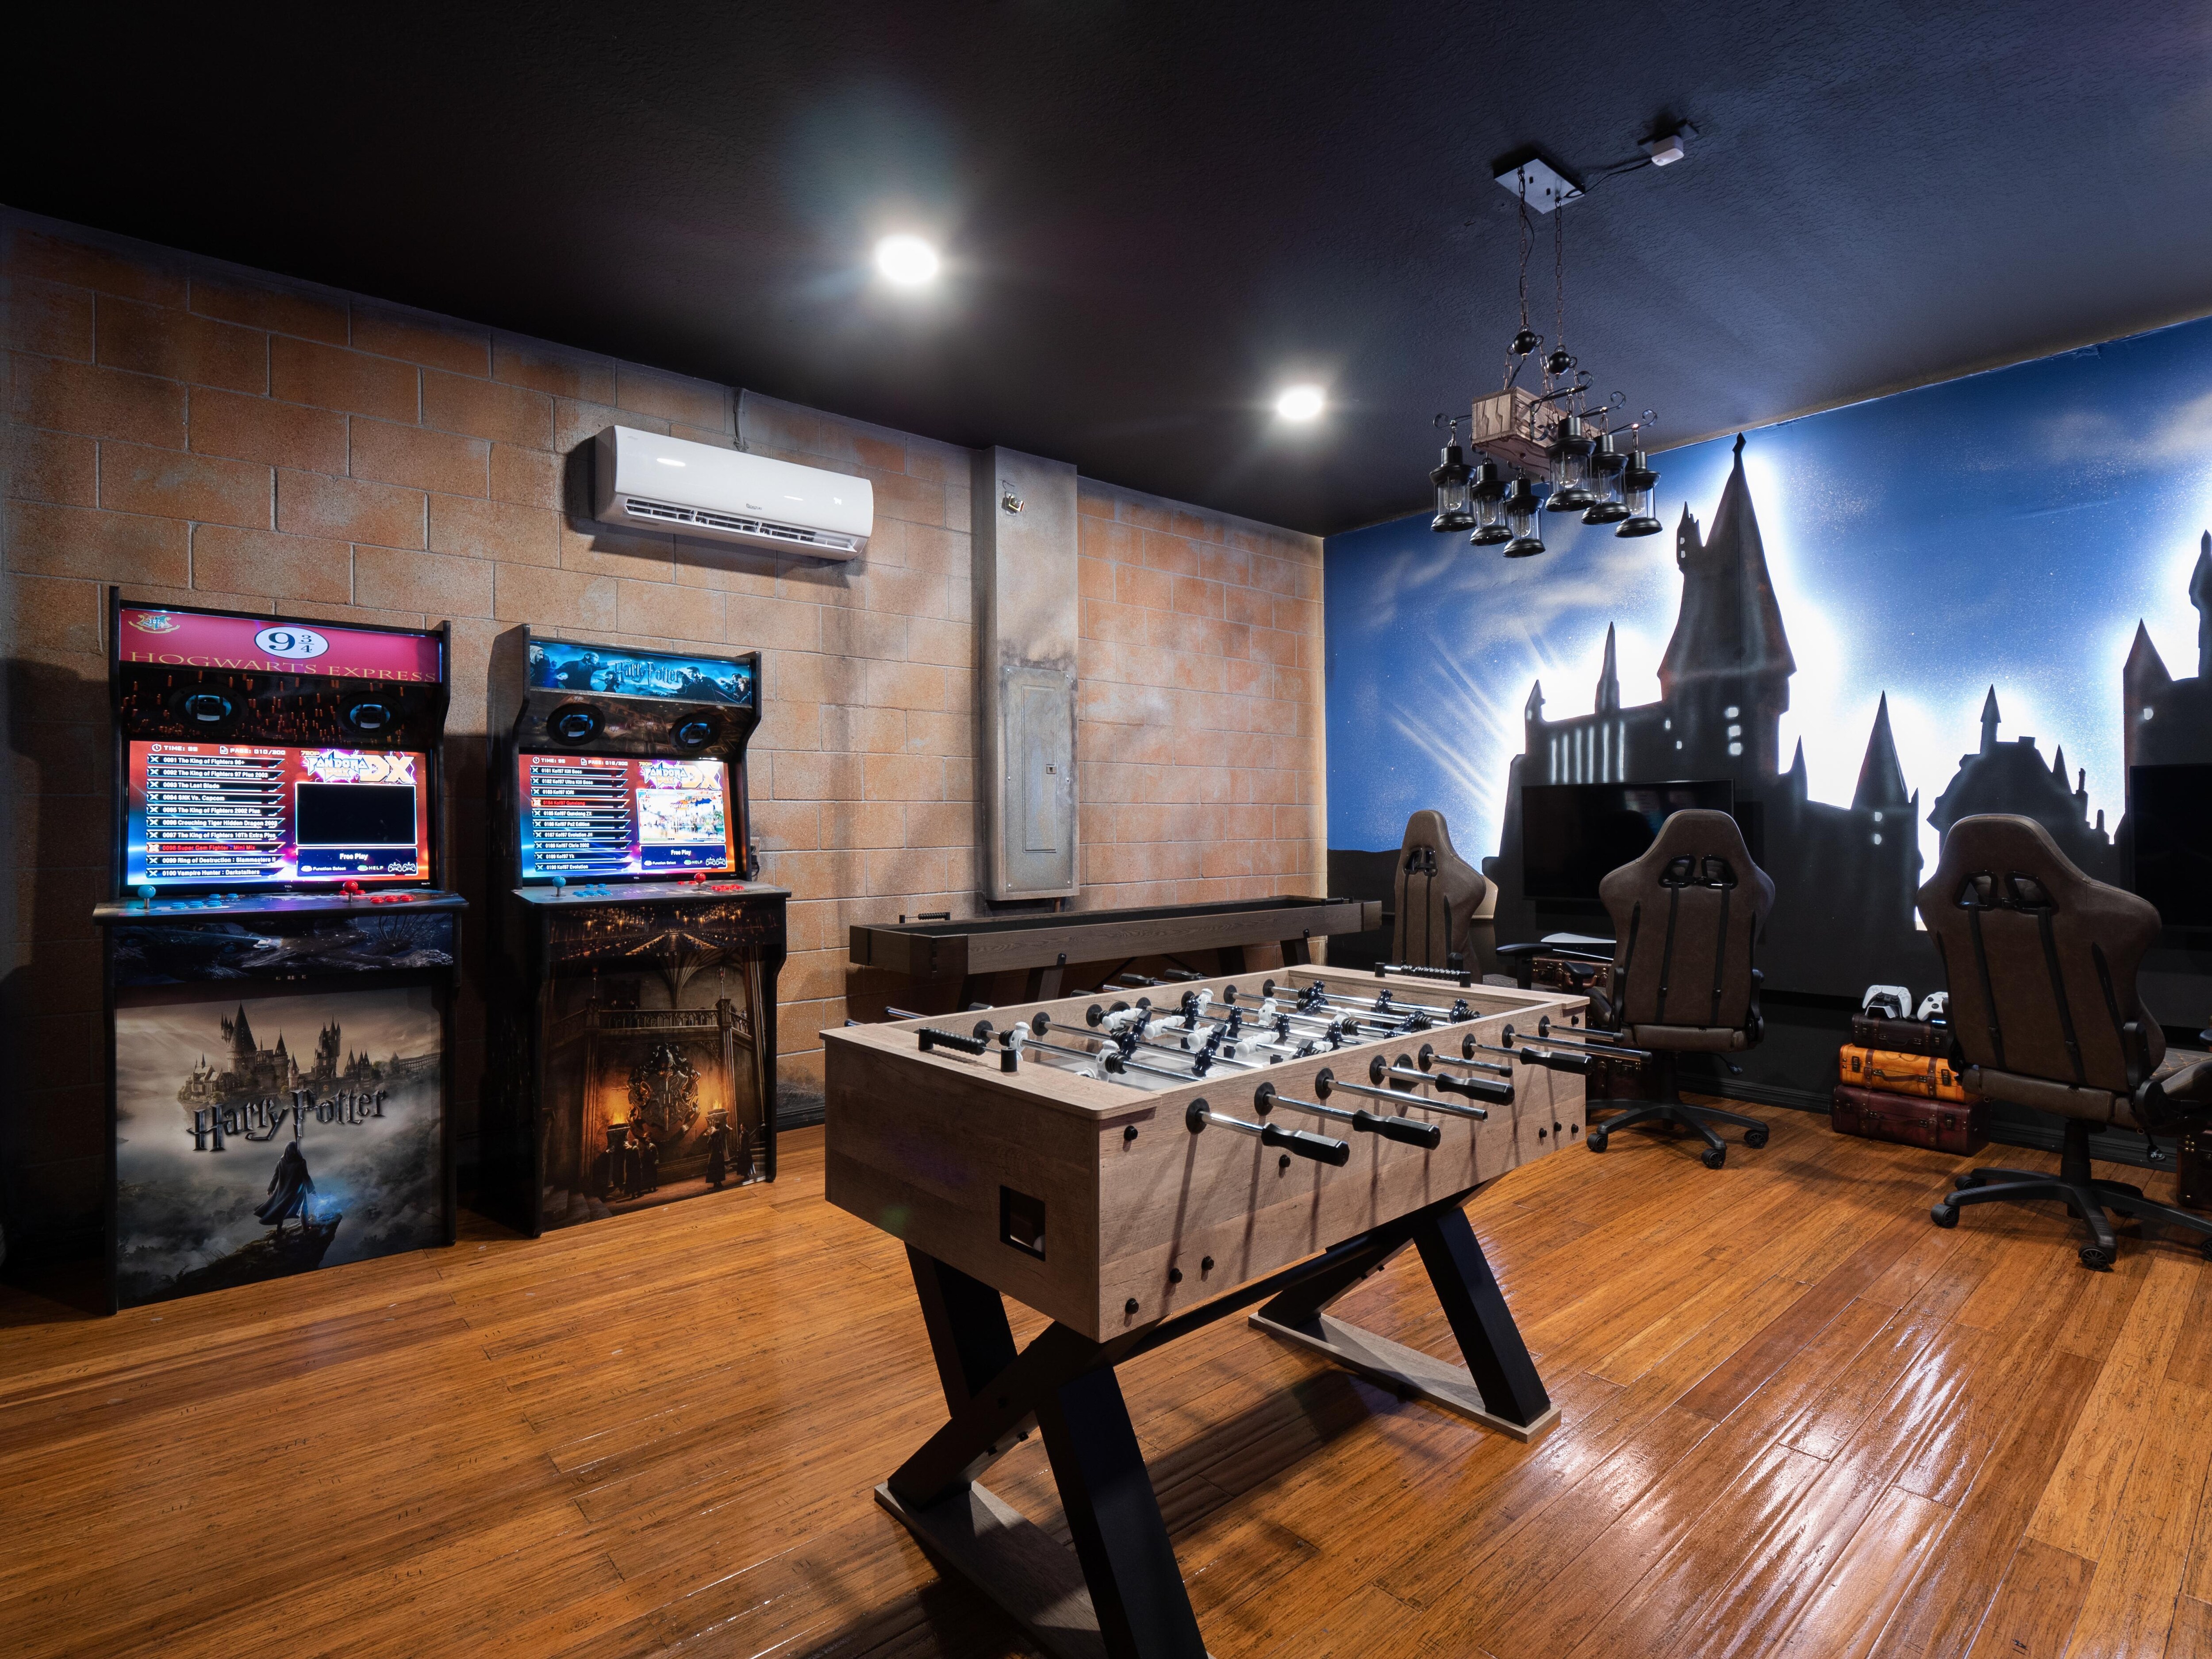 Magical Game Room with Football, Air Hockey Arcade Games and More!
